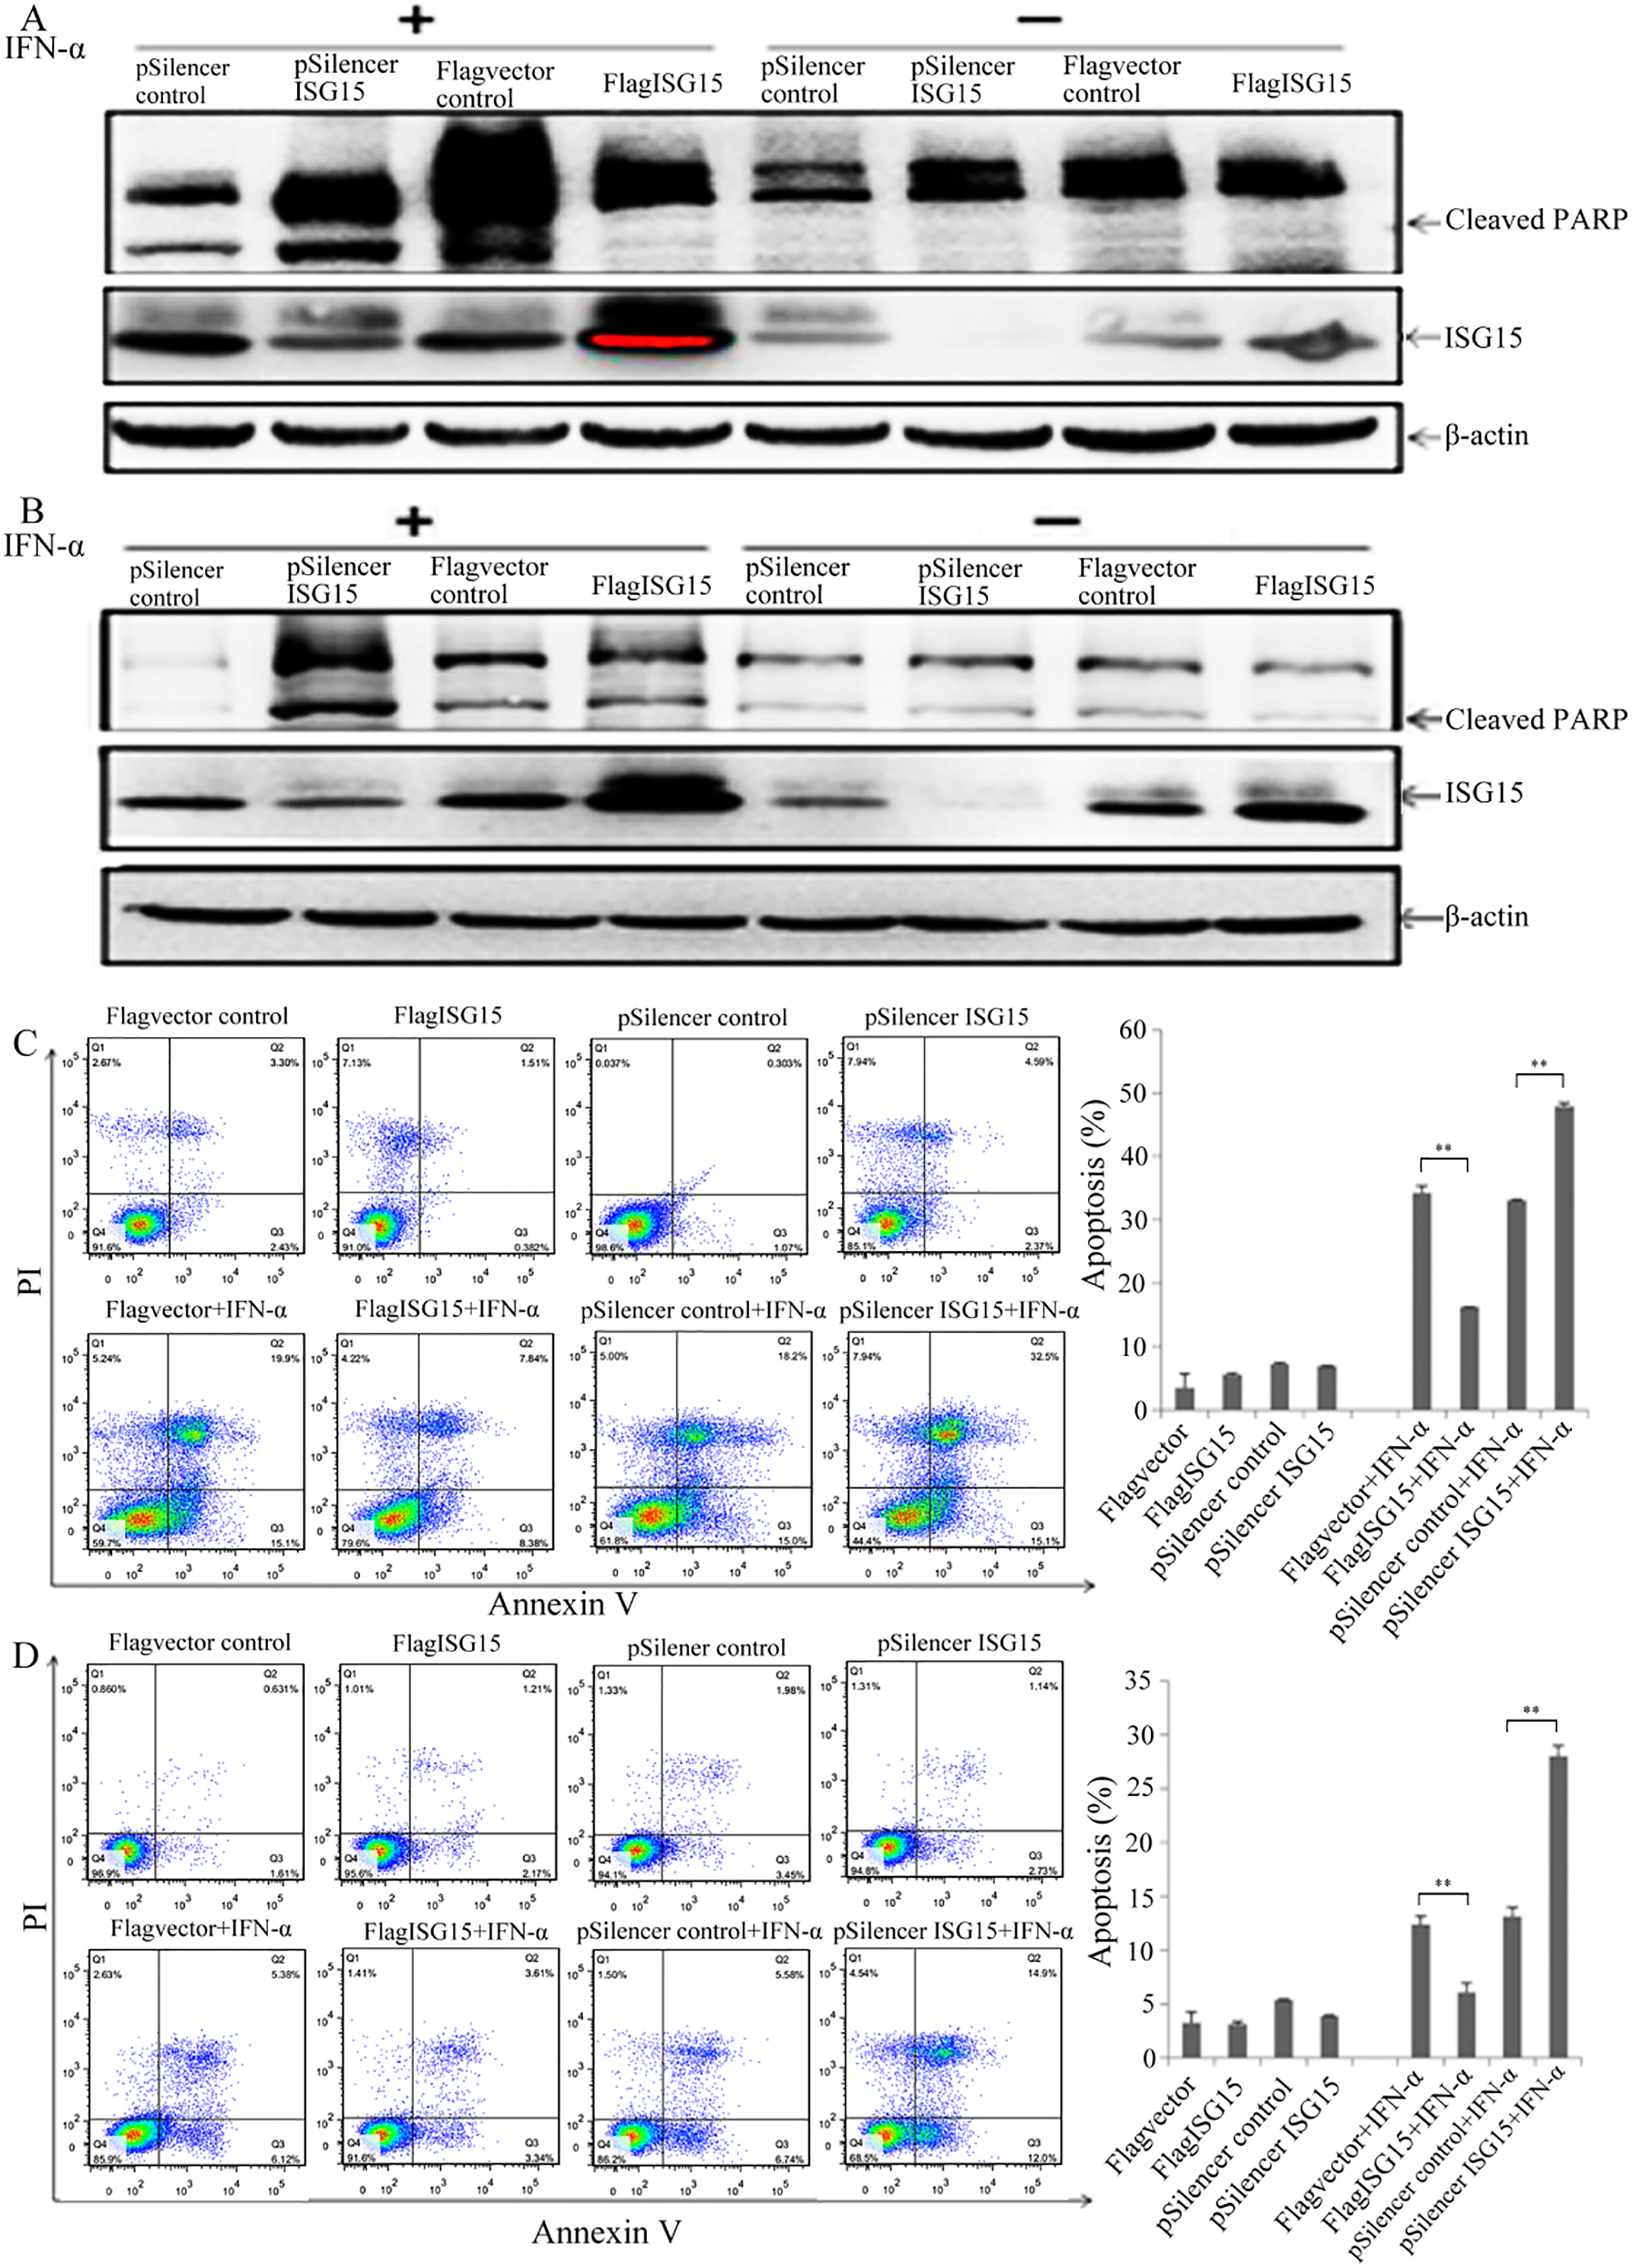 ISG15 mediates IFN-α sensitivity in HCC cells. Western blotting was used to detect PARP cleavage and ISG15 protein expression in (A) LH86 and (B) Huh7 cells after treatment with 2,000 IU/mL IFN-α for 48 h. Apoptosis in (C) LH86 and (D) Huh7 cells was assessed using flow cytometry after treatment with 2,000 IU/mL IFN-α for 48 h. The data presented are representative of 3 independent experiments. 